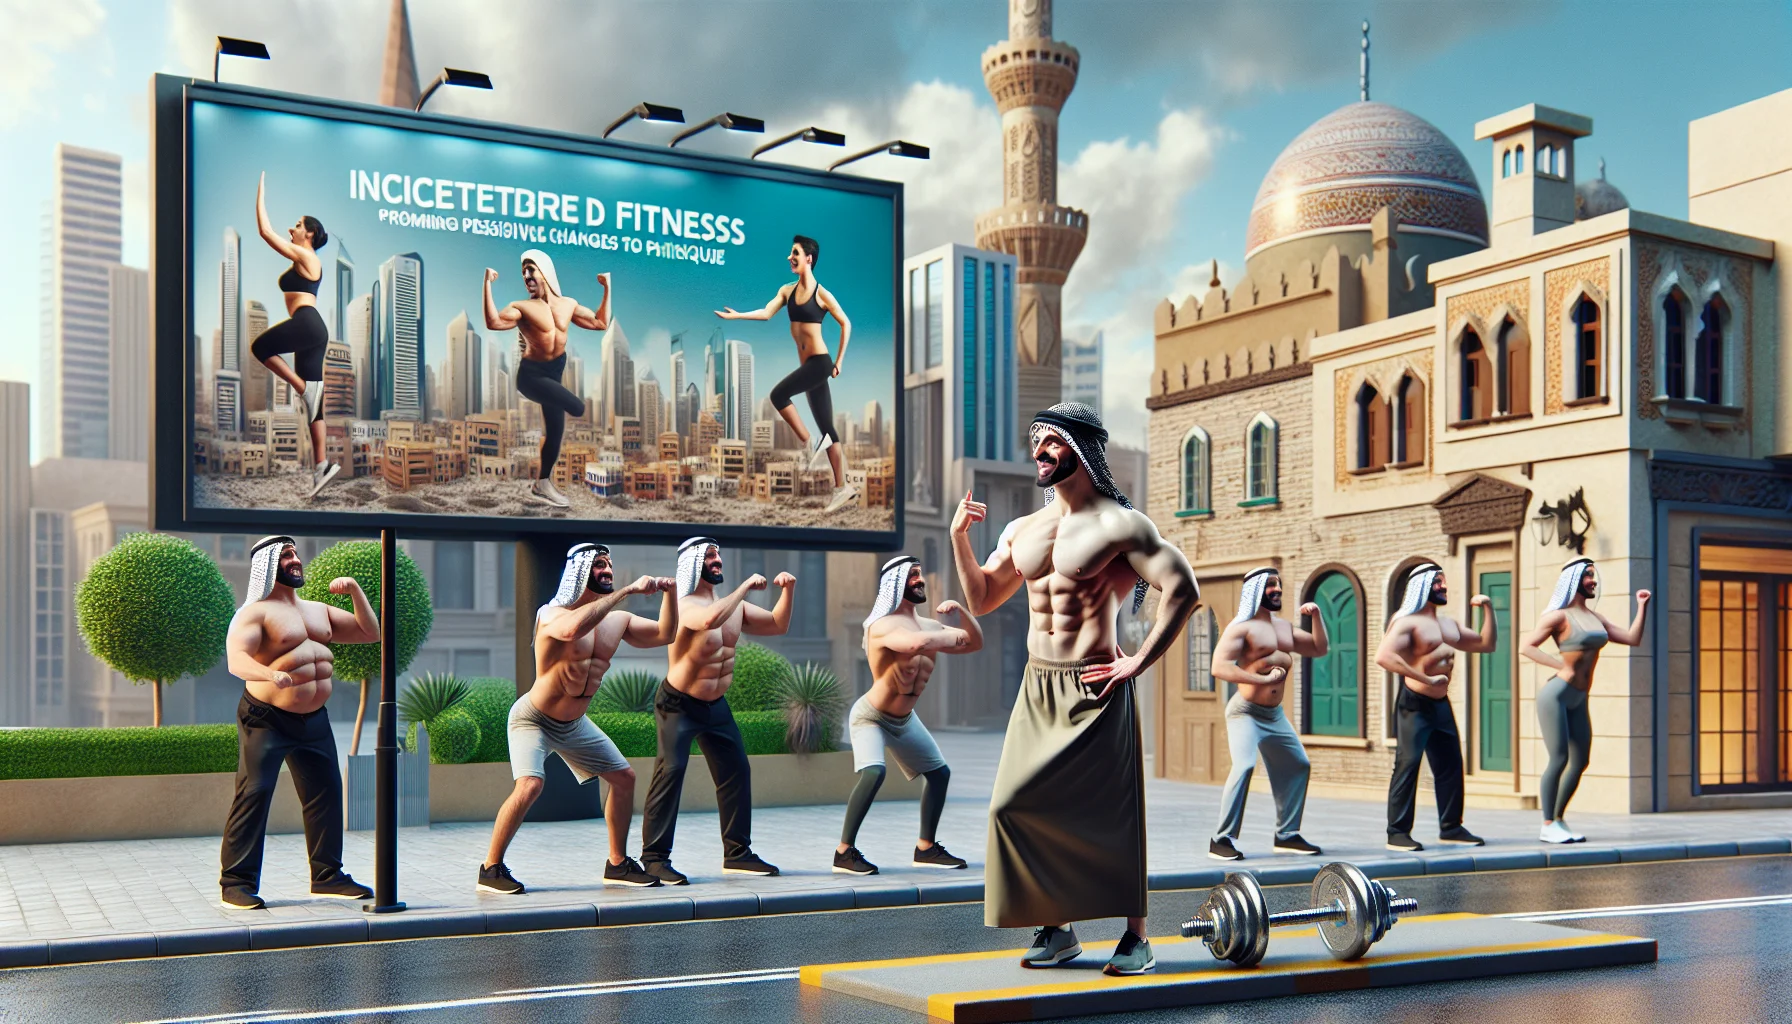 Create an image showcasing a light-hearted scenario enticed towards fitness. Visualize a location similar to the fancy streets of a popular affluent neighborhood, complete with fine establishments and luxurious residences. Display an enthusiastic fitness instructor, of Middle Eastern descent, demonstrating exciting exercise routines that promise to lift, firm, and sculpt one's physique. In the background, include a large billboard depiction of before and after representations of the fitness routine promising positive changes in physique. Add humorous elements, such as passerby with amused expressions or amusingly exaggerated reactions to the fitness routines.